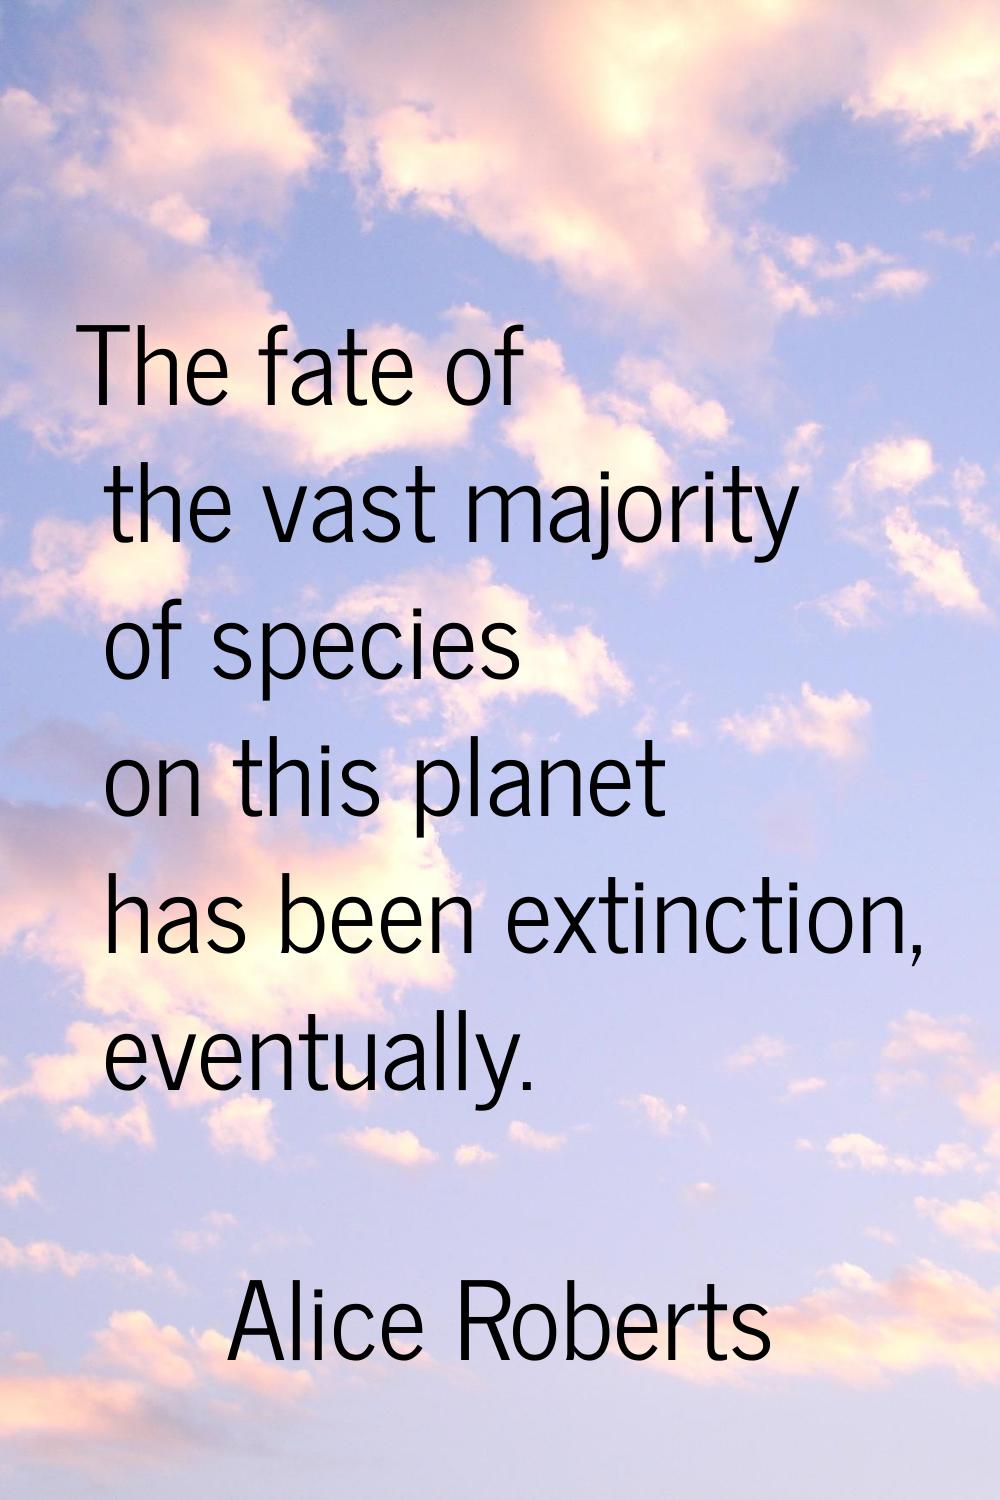 The fate of the vast majority of species on this planet has been extinction, eventually.